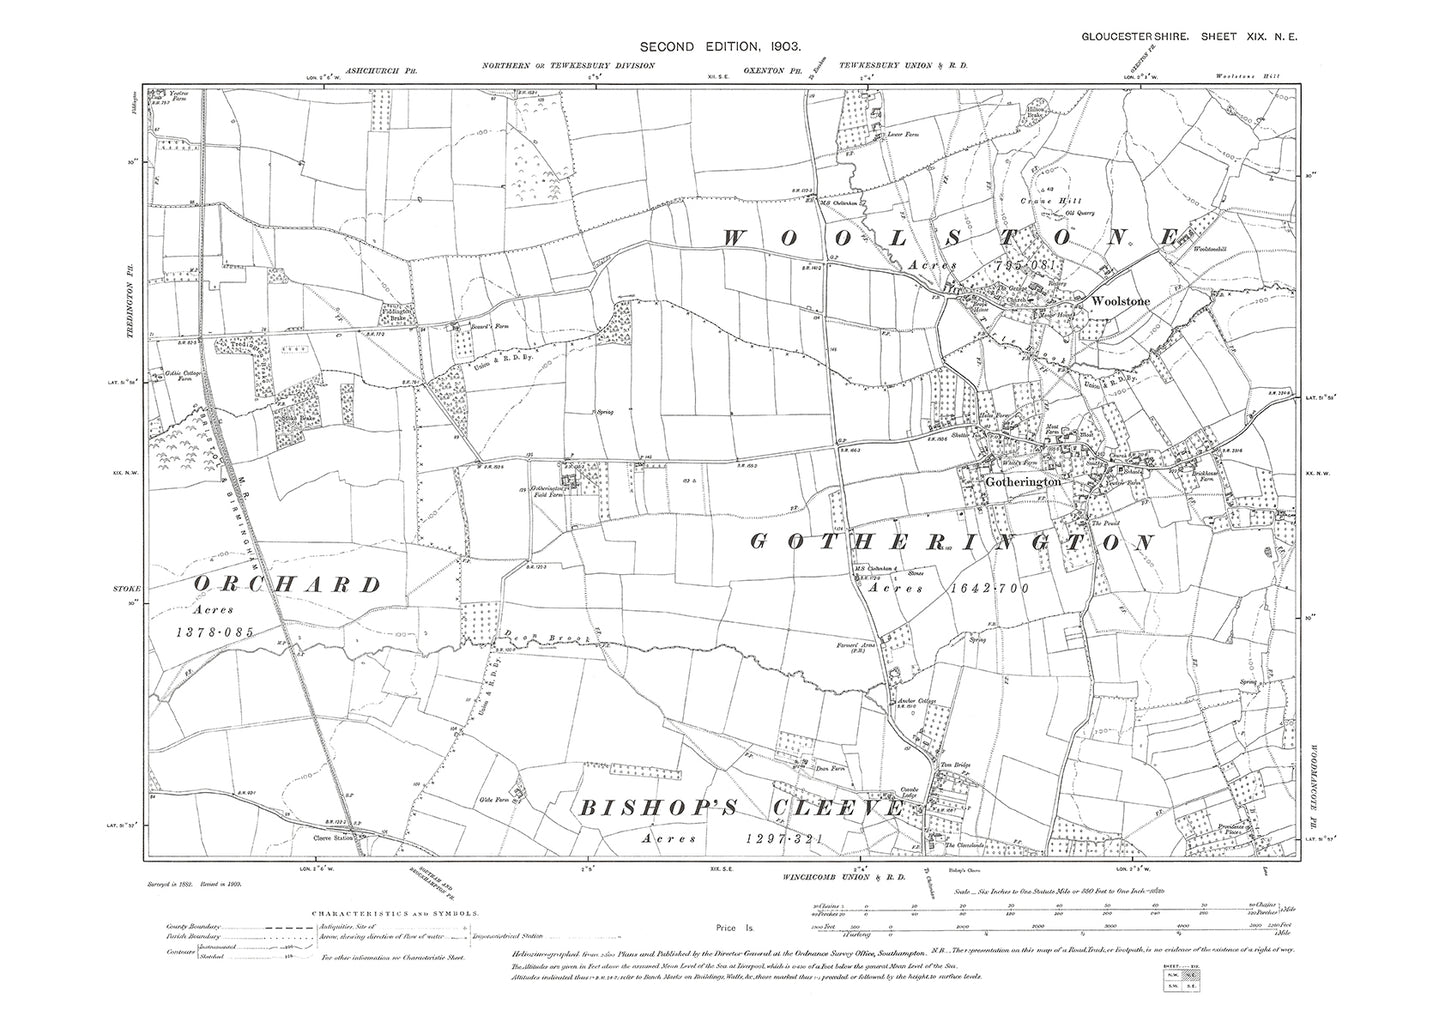 Old OS map dated 1903, showing Gotherington, Woolstone in Gloucestershire - 19NE